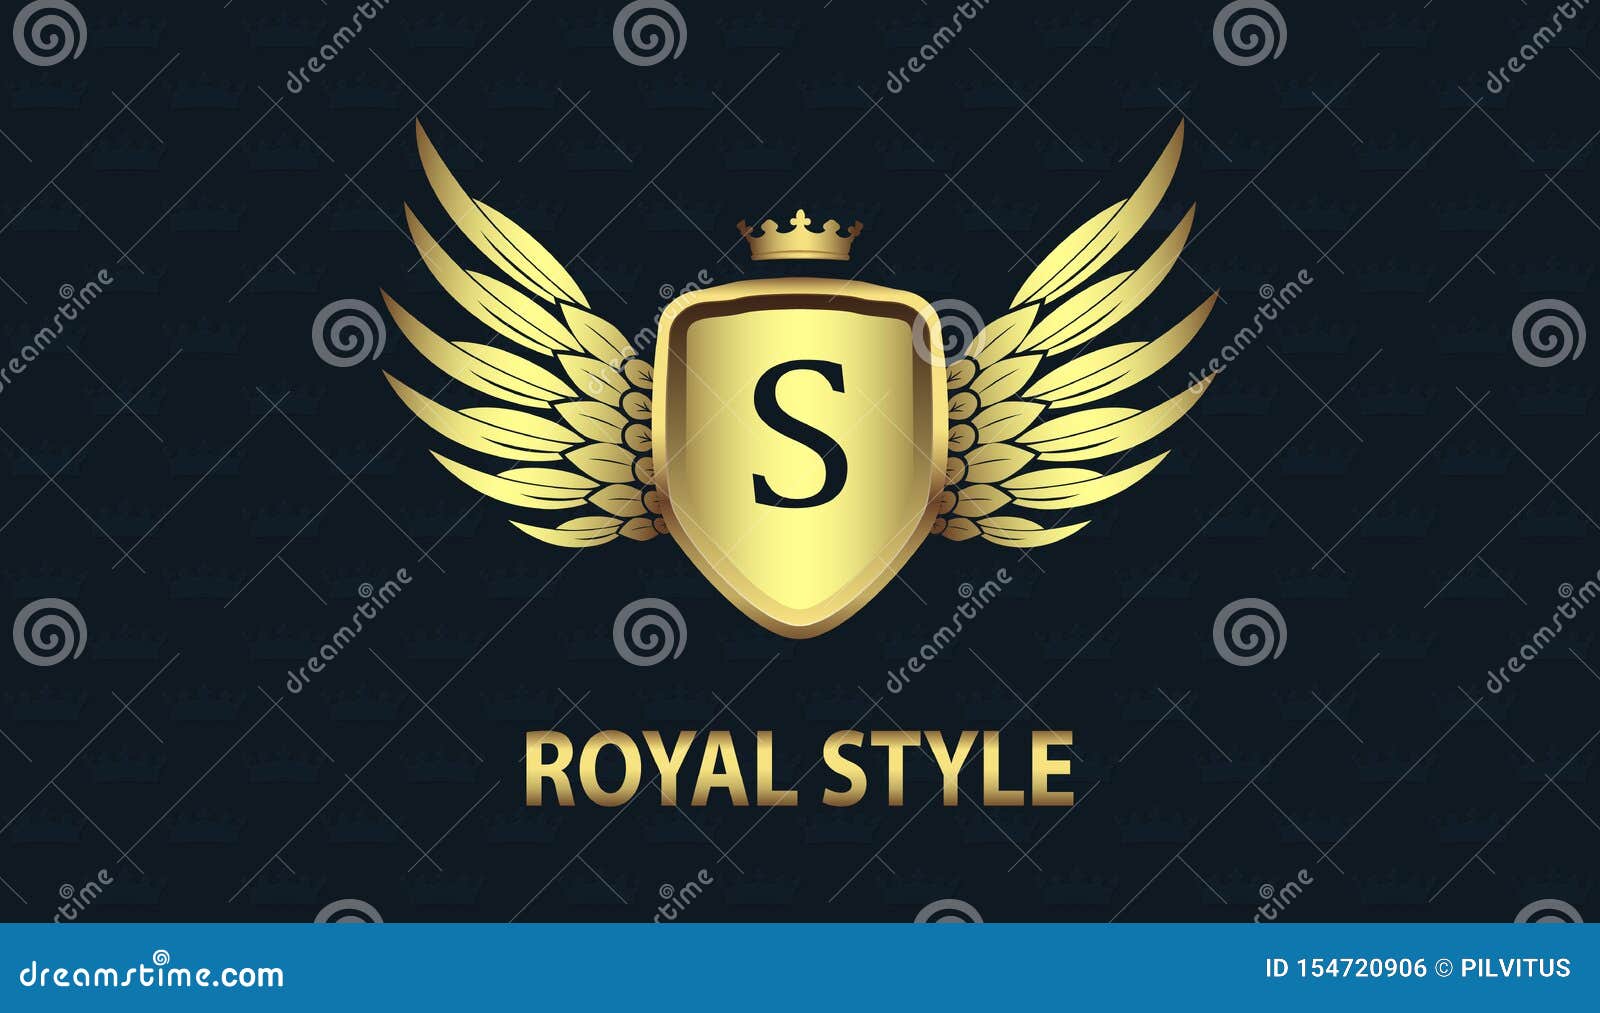 Stylish Gold Shield with Wings, Crown and Initial Letter S ...